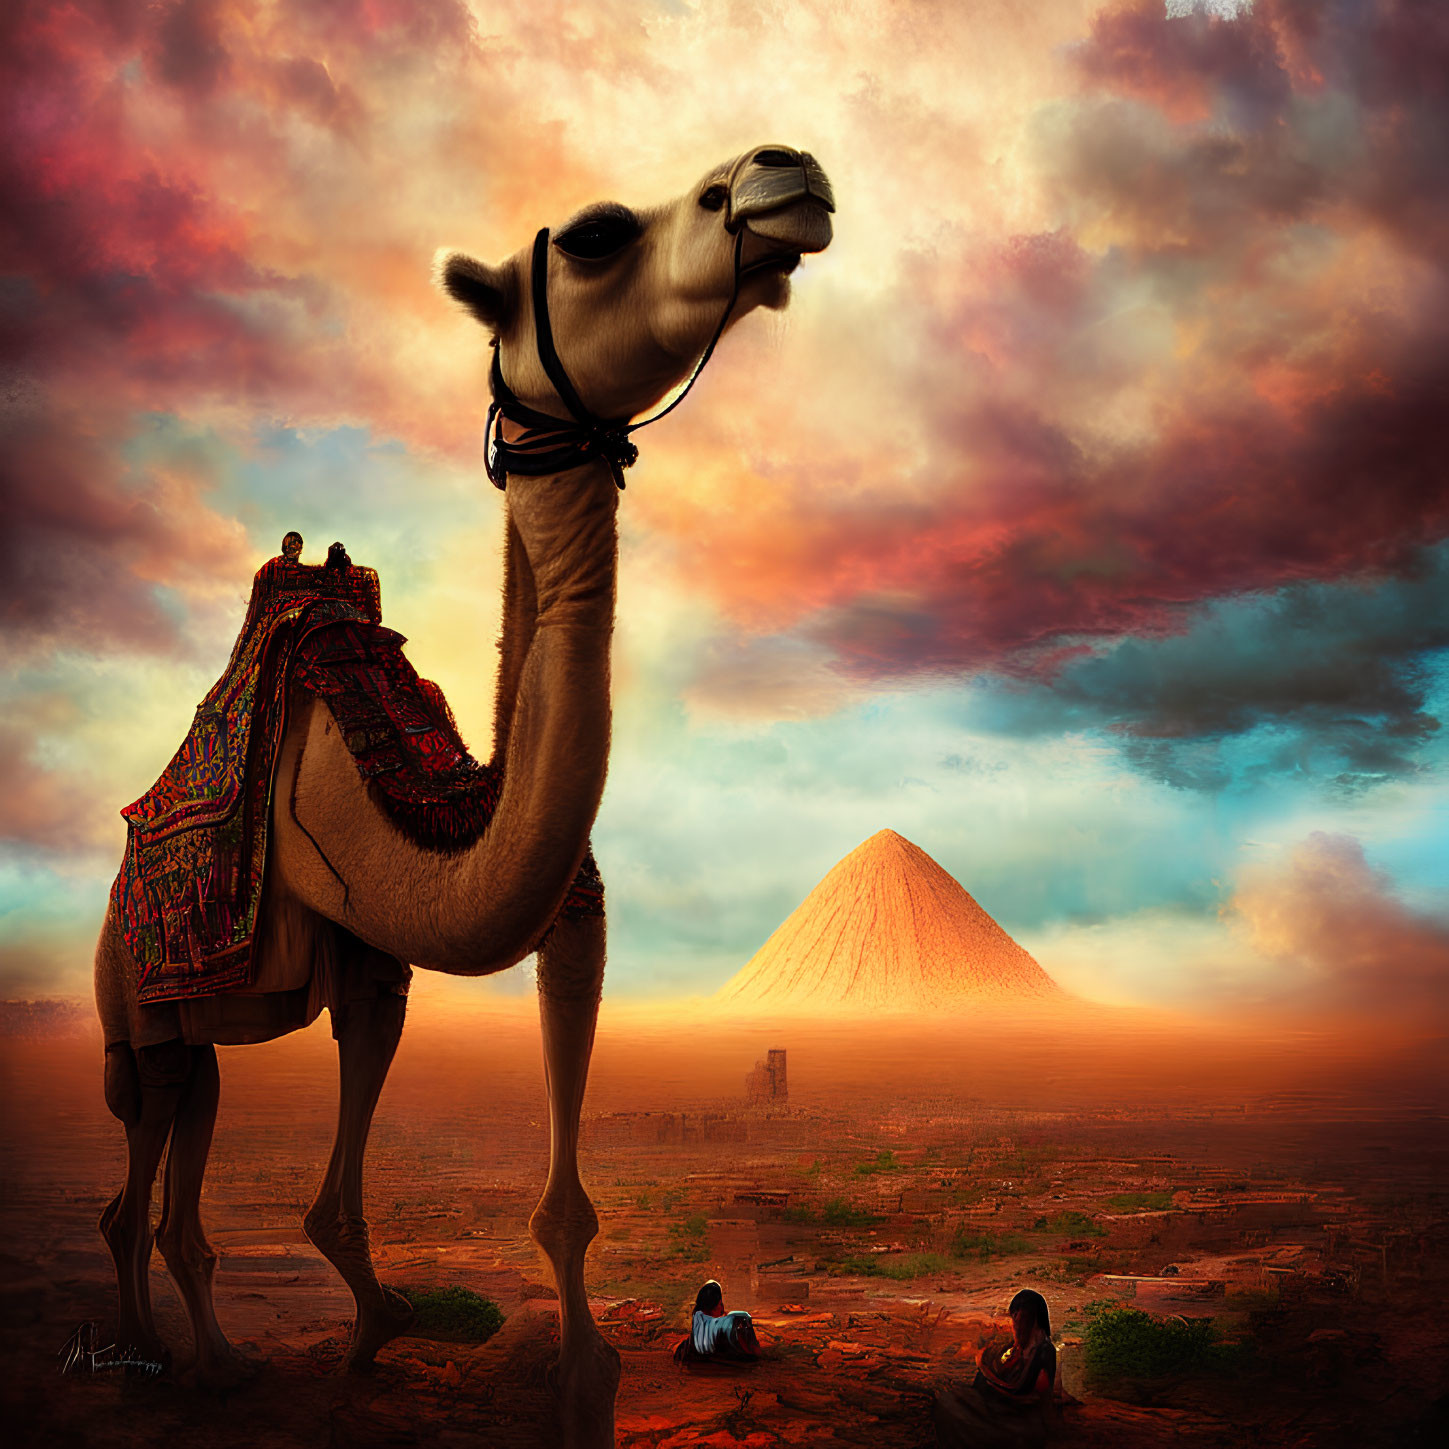 Camel and People with Pyramid in Desert Sunset Landscape